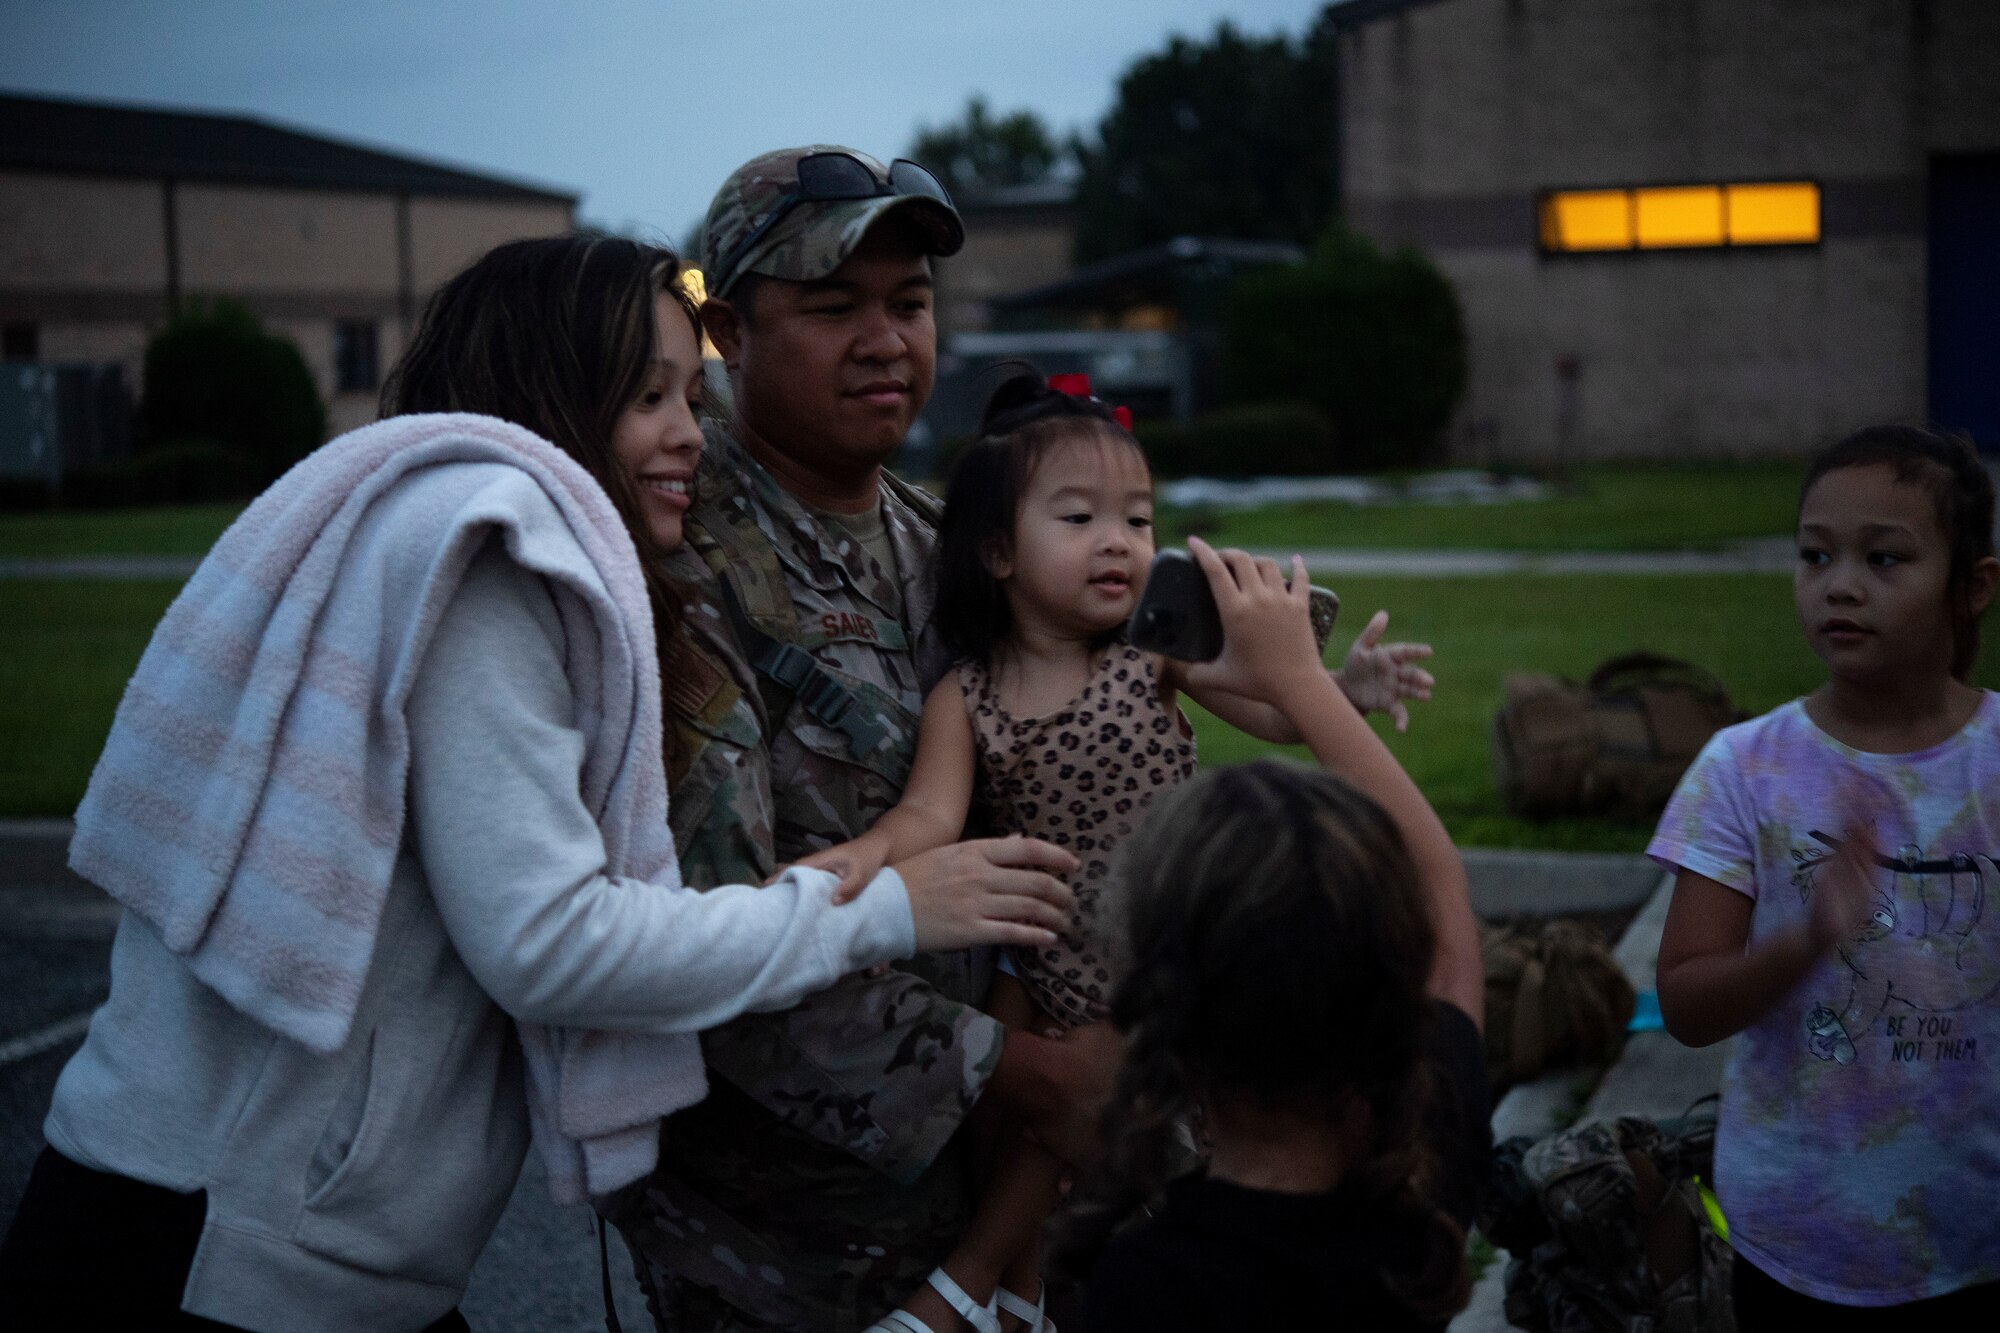 U.S. Air Force Staff Sgt. Jeff Sales, 822nd Base Defense Squadron combat arms instructor, spends time with his family at Moody Air Force Base, Georgia, Aug. 28, 2021. Sales and more than 160 Airmen from the squadron have deployed to Holloman Air Force Base, New Mexico, in support of Task Force – Holloman. The Department of Defense, through U.S. Northern Command, and in support of the Department of Homeland Security, is providing transportation, temporary housing, medical screening, and general support for at least 50,000 Afghan evacuees at suitable facilities, in permanent or temporary structures, as quickly as possible. This initiative provides Afghan personnel essential support at secure locations outside Afghanistan. (U.S. Air Force photo by Master Sgt. Daryl Knee)